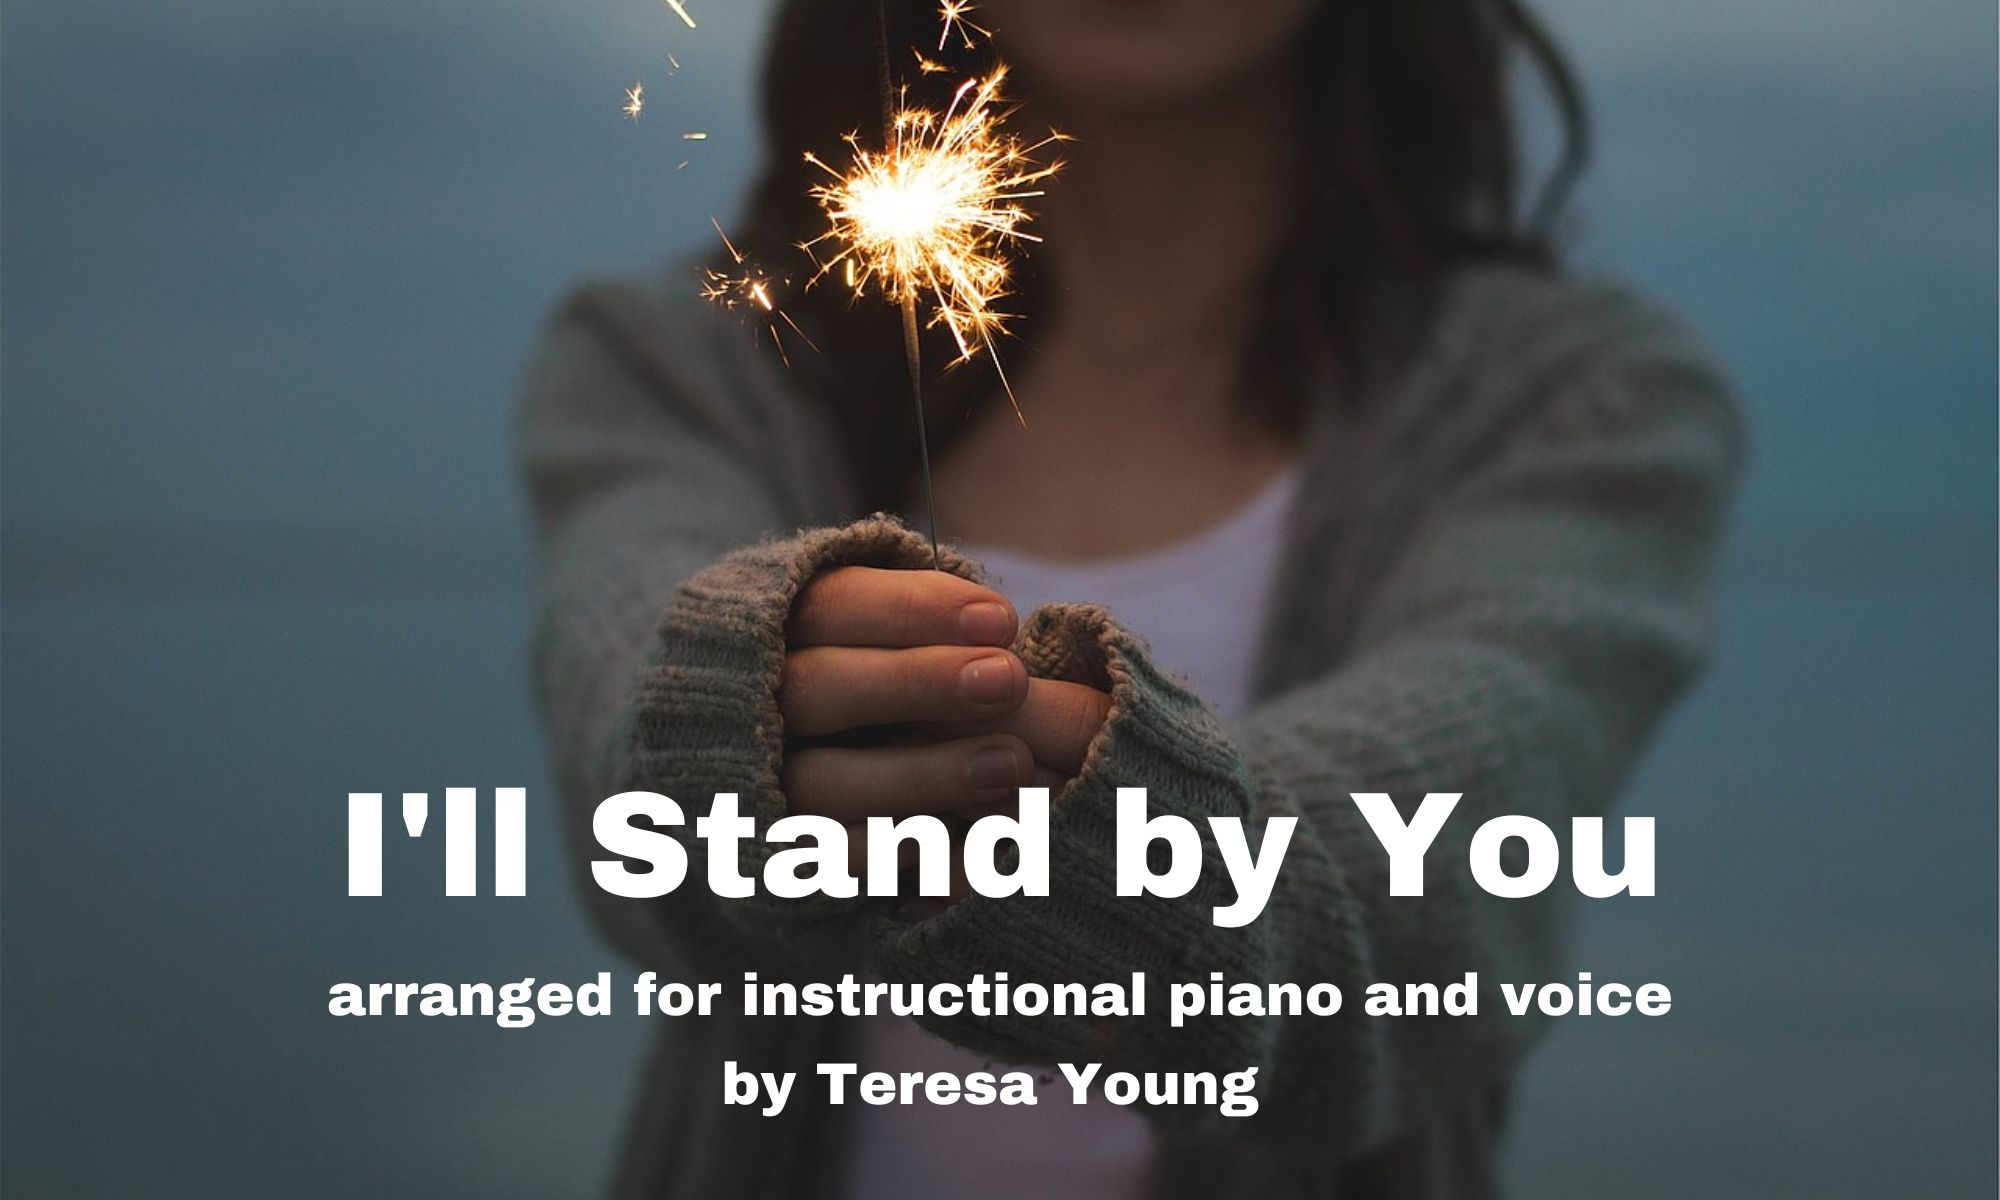 I'll Stand by You arr. Teresa Young